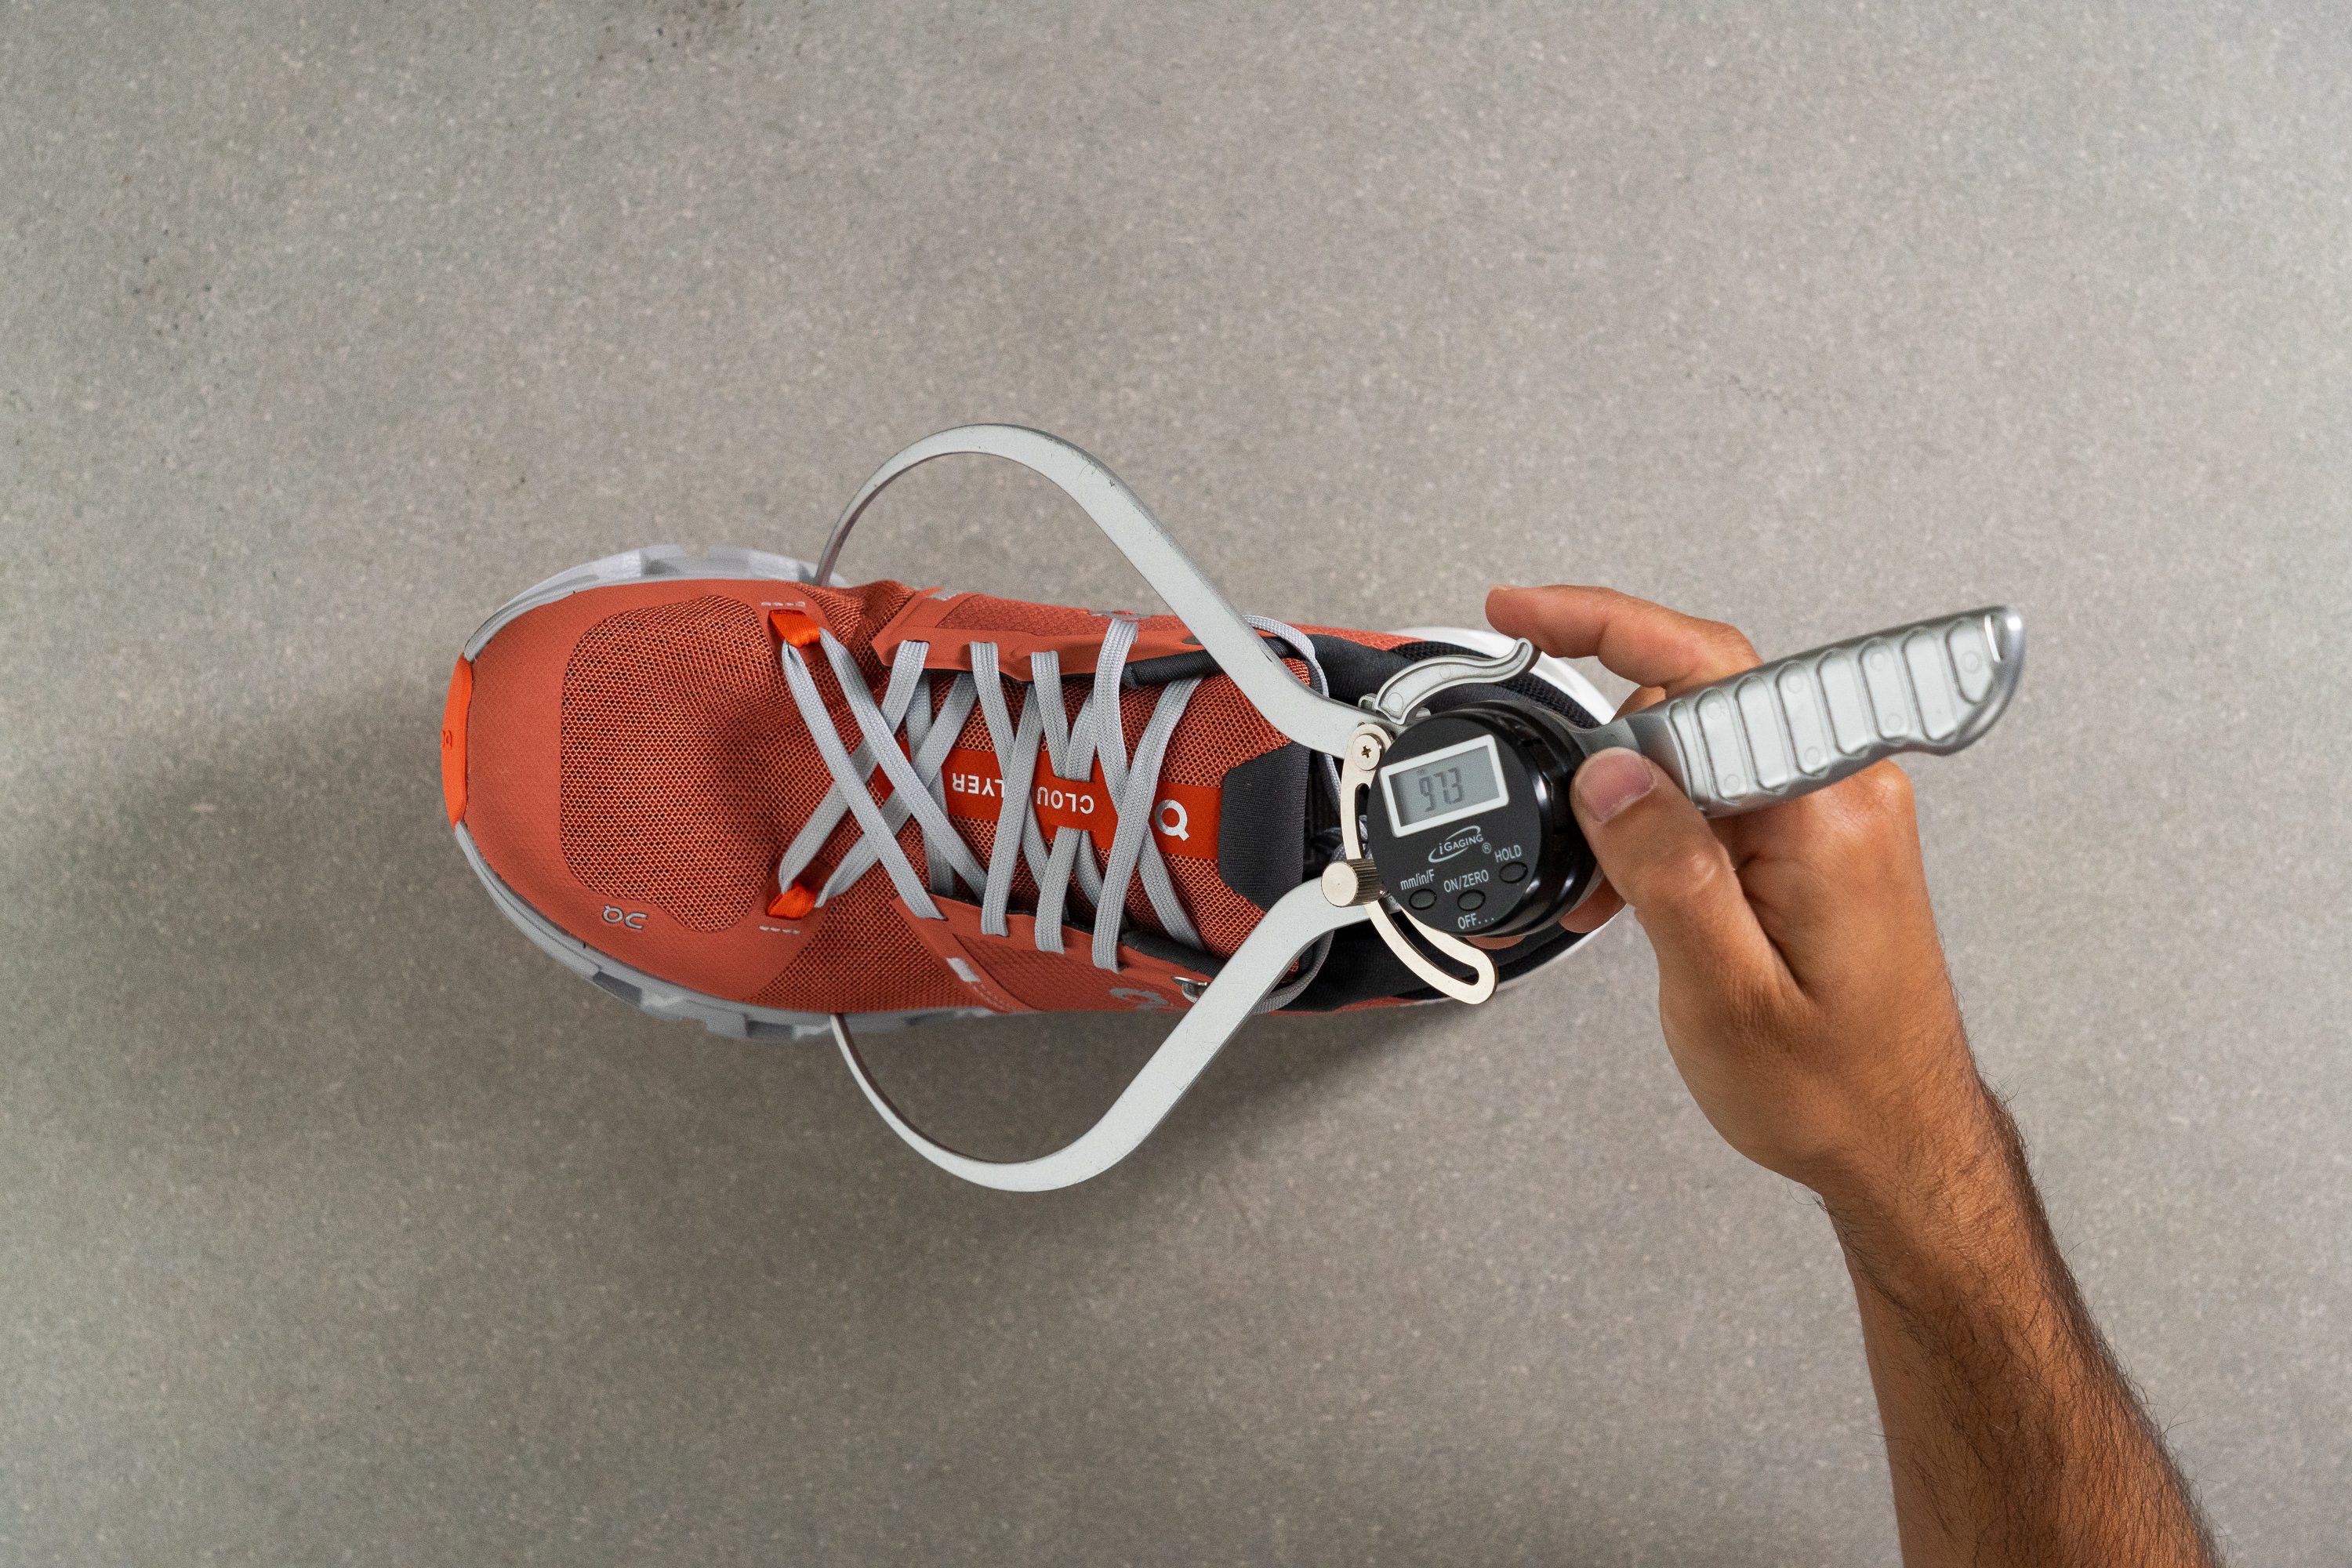 held up, we thought this shoe would be great for solid durability Weird lacing system